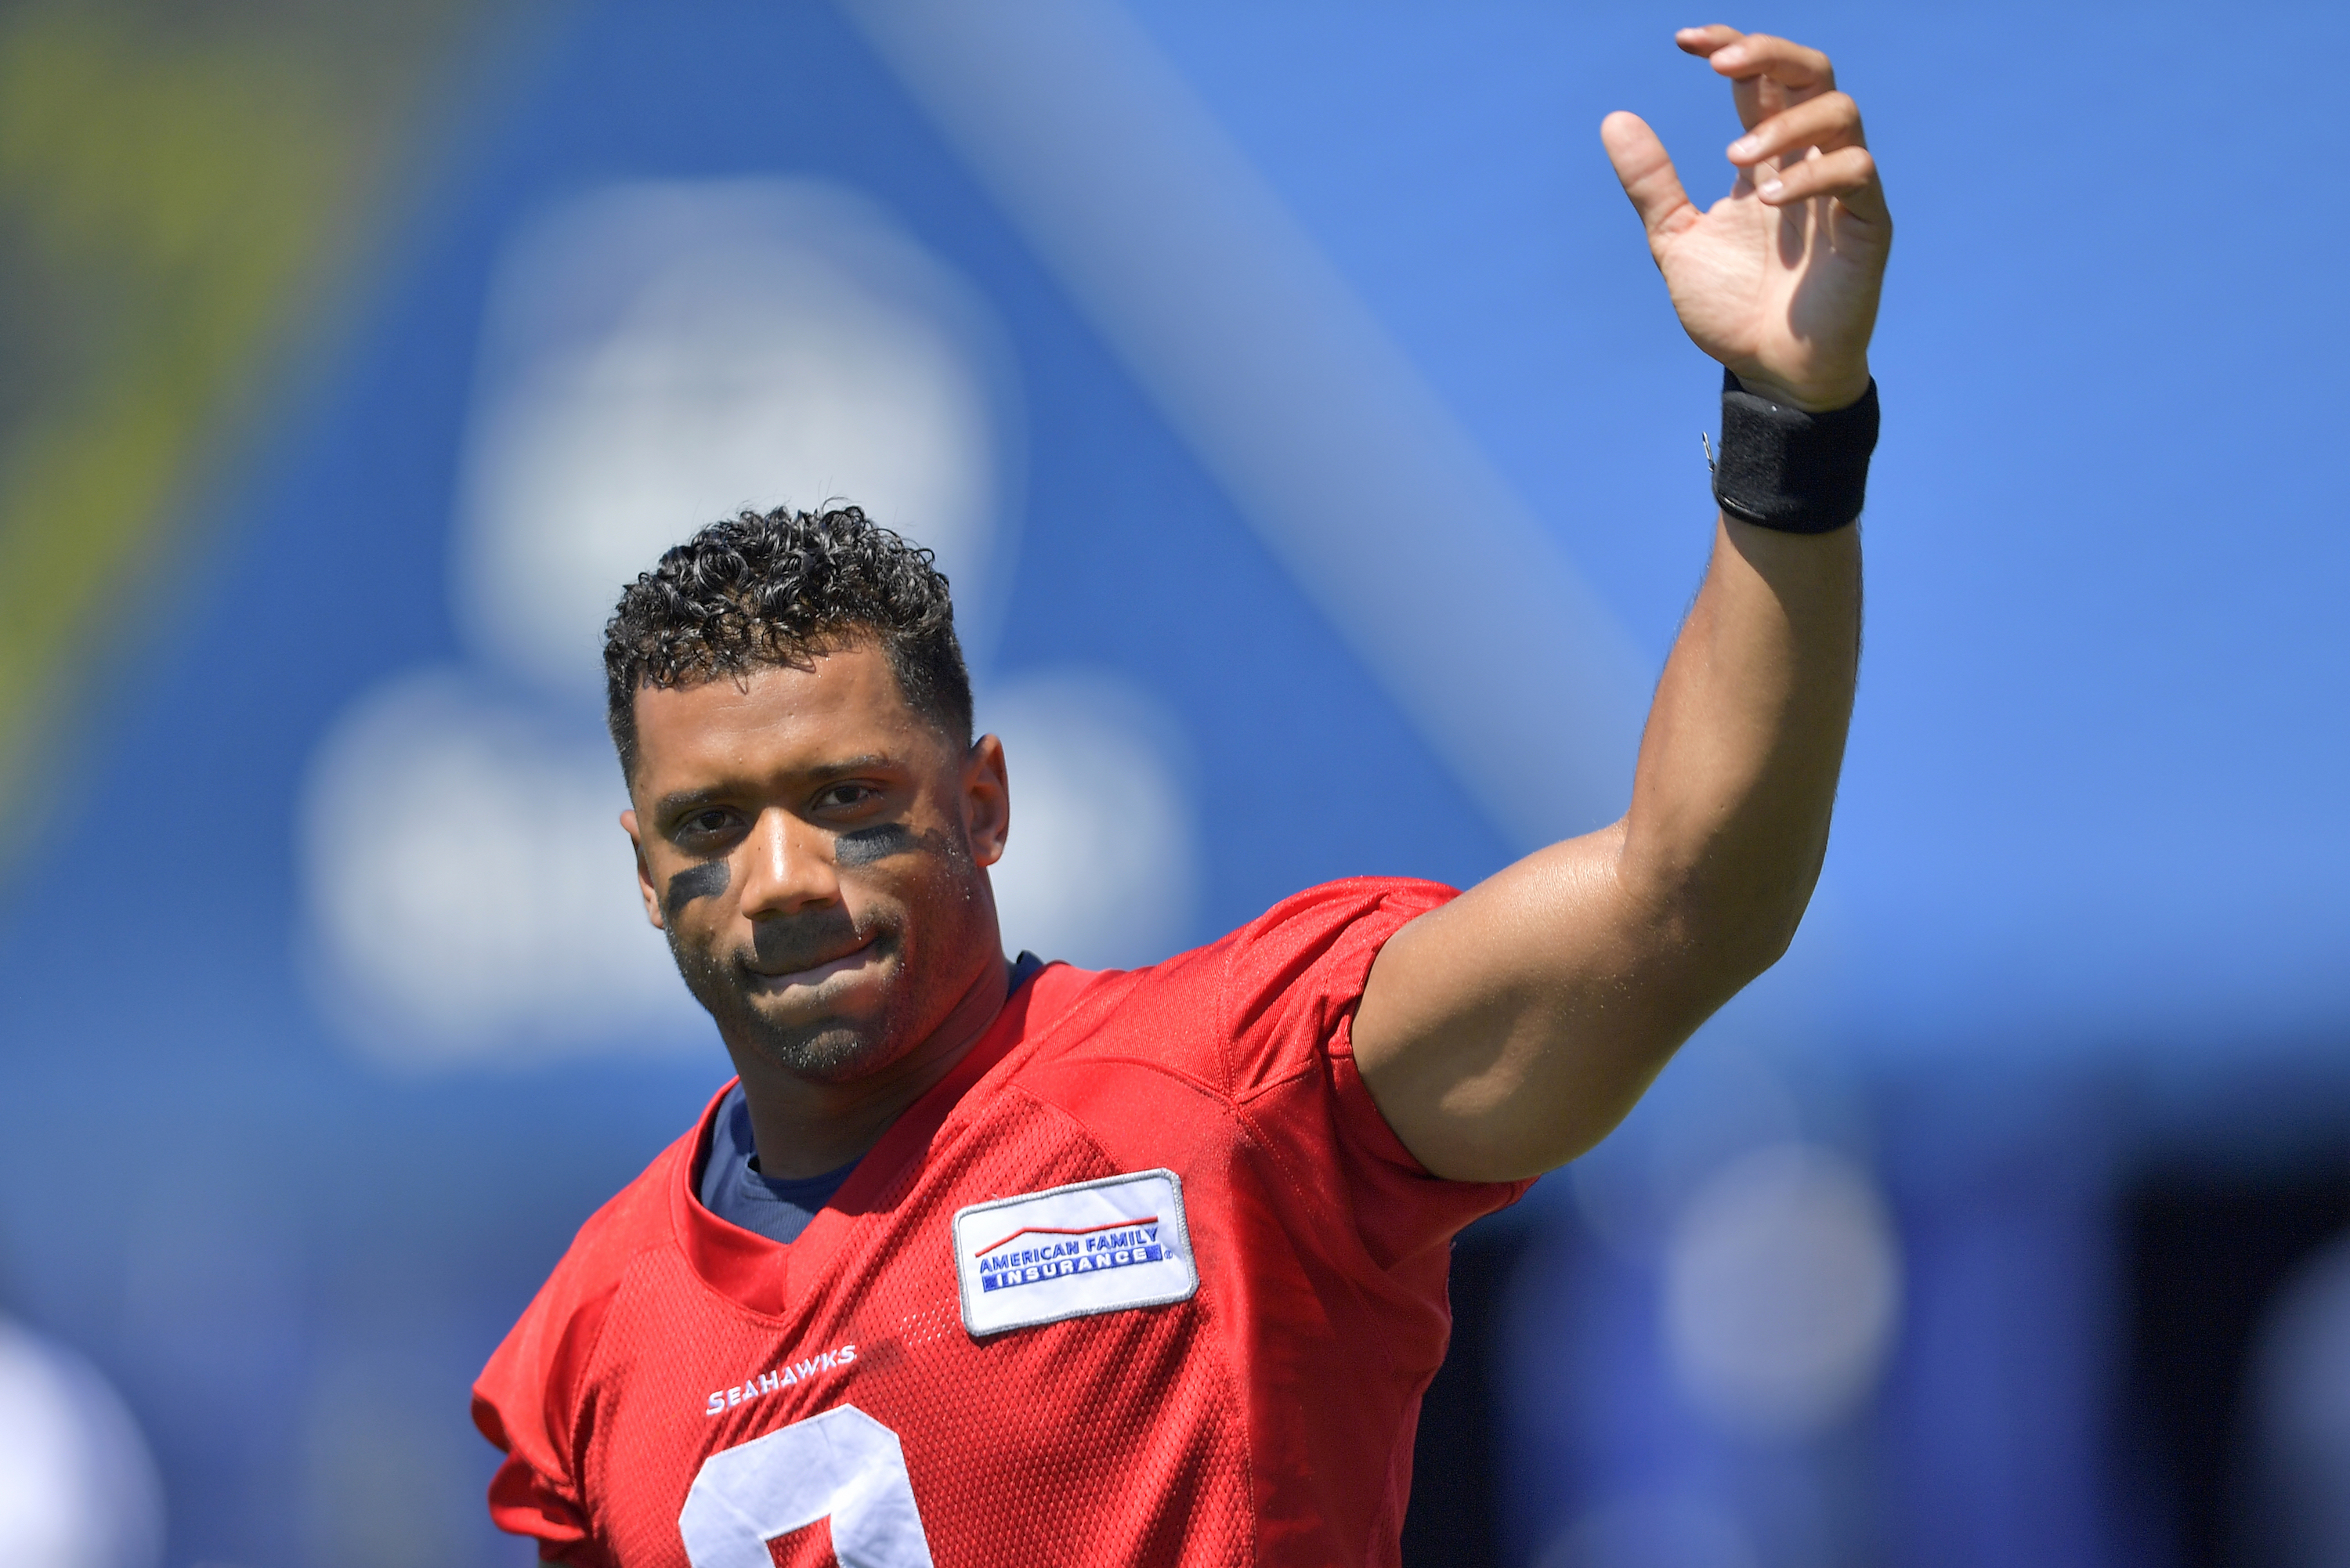 Russell Wilson waves to the crowd during Seattle Seahawks training camp